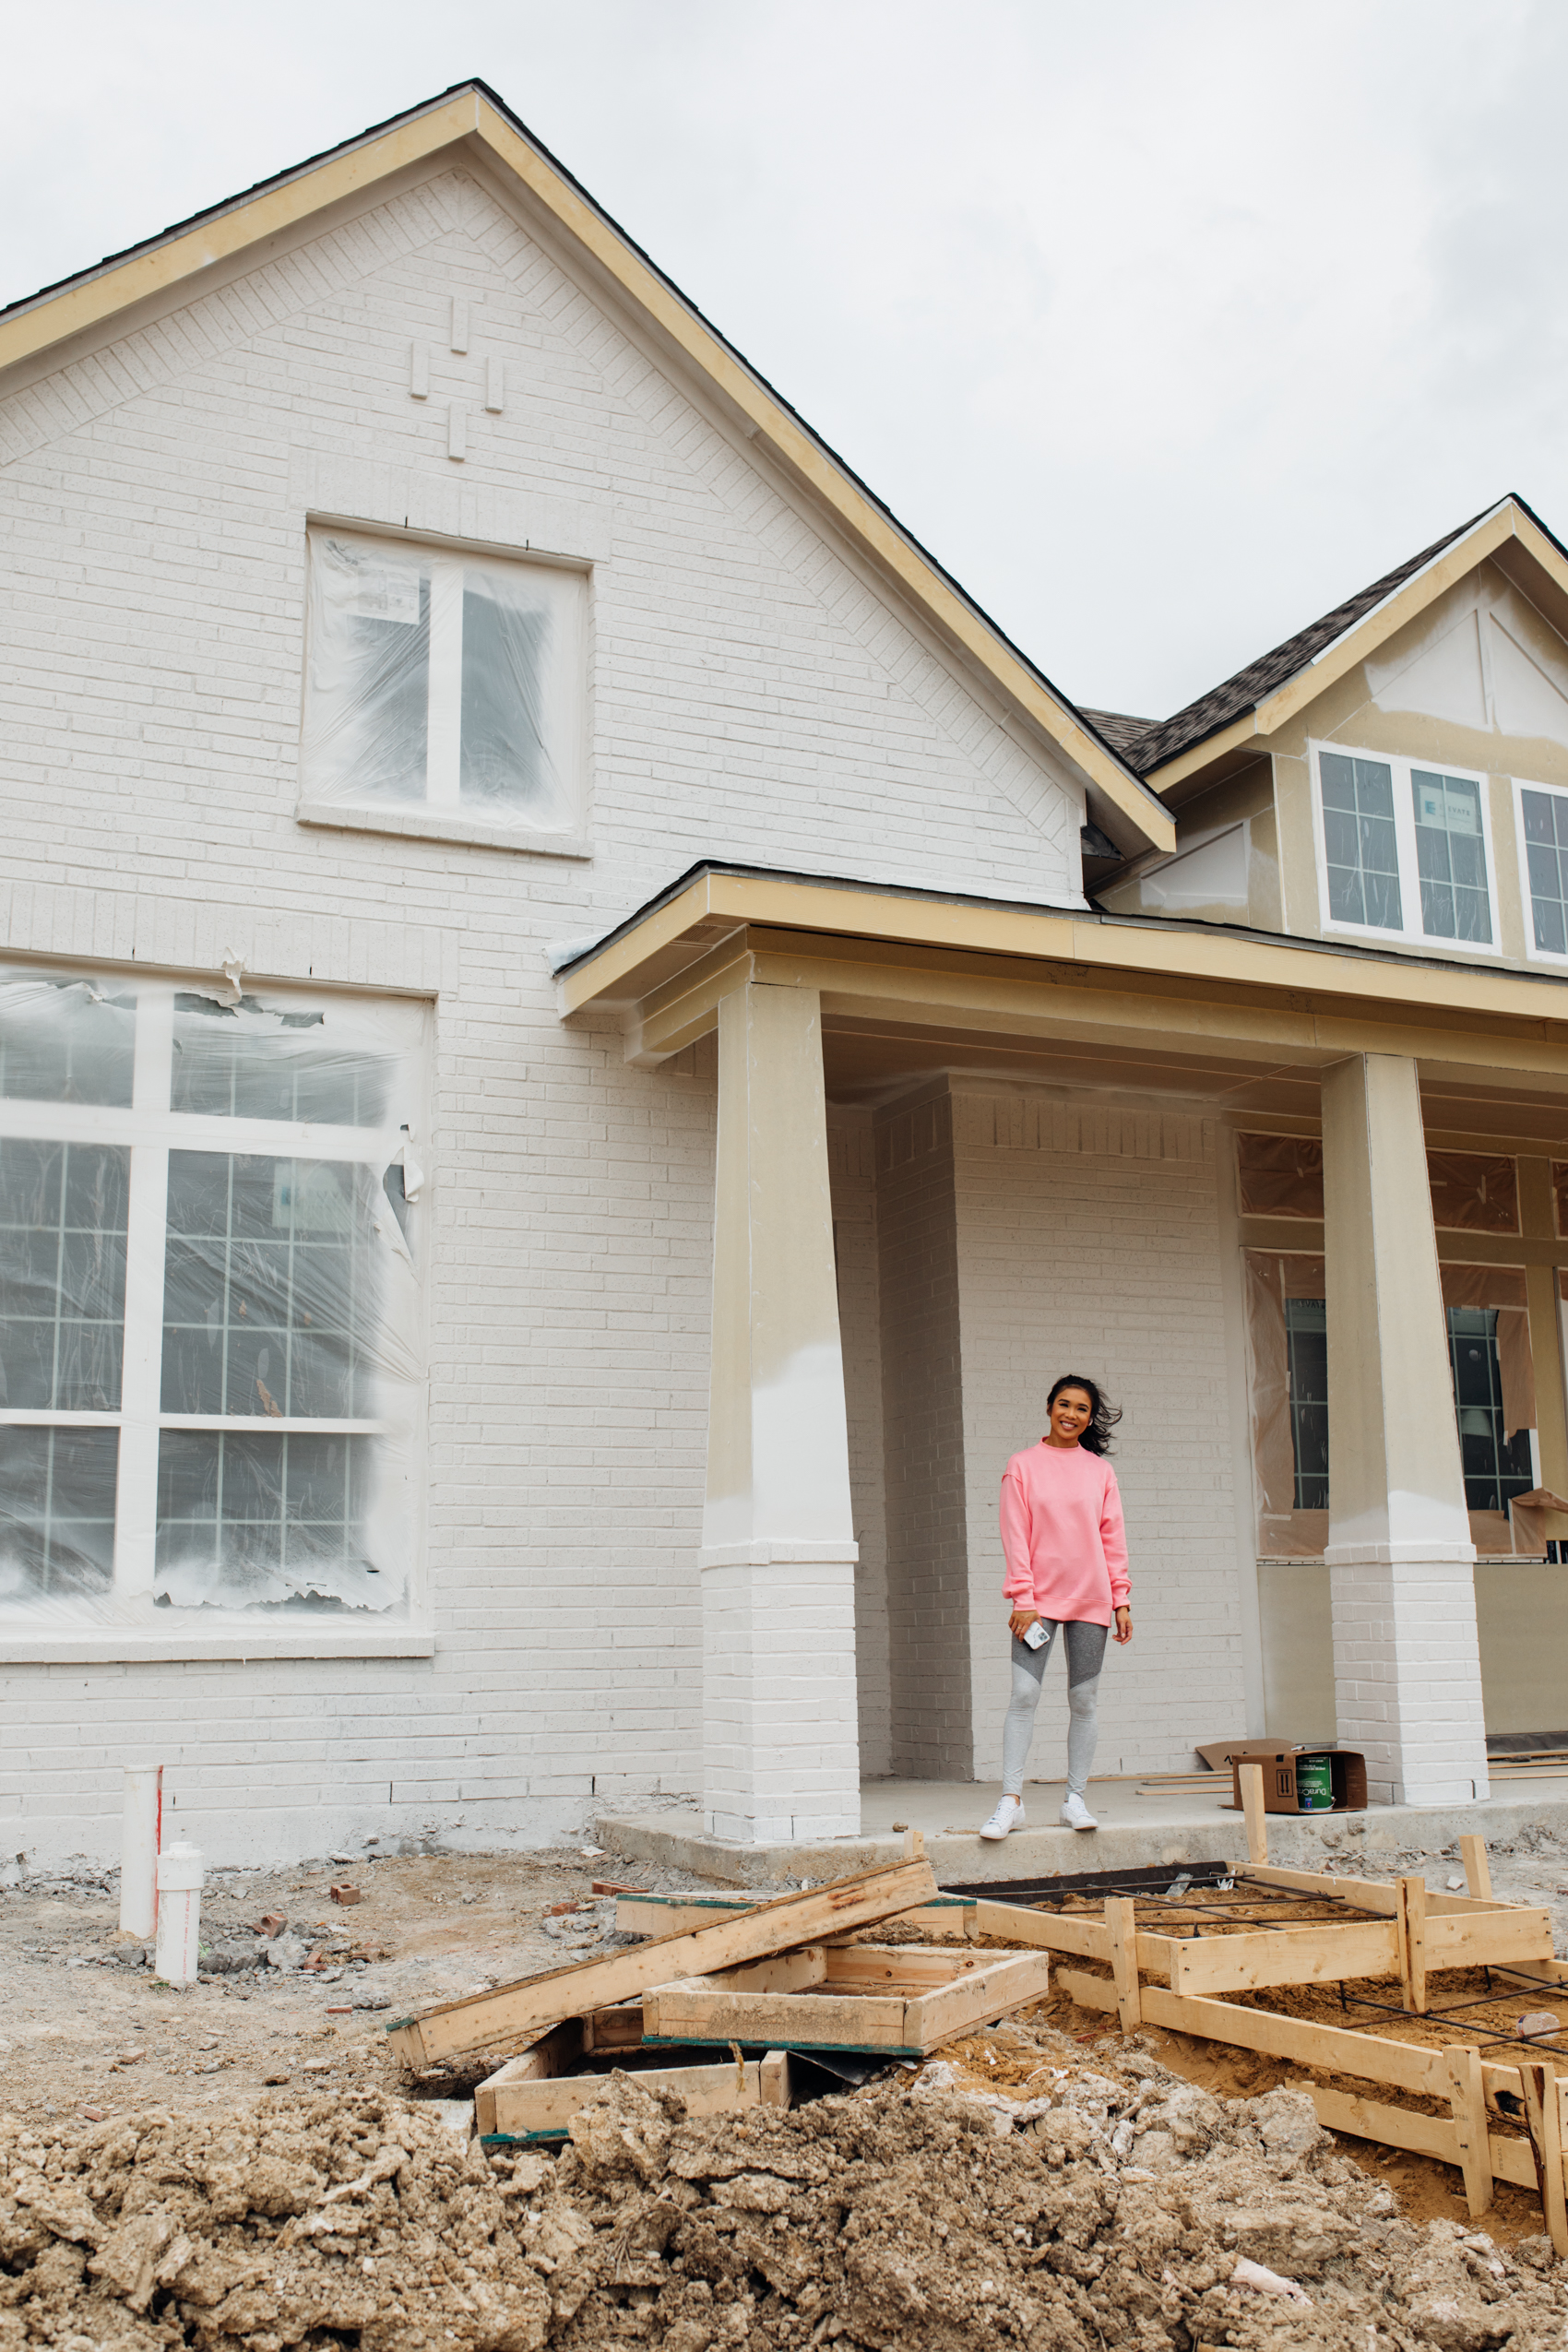 Blogger Hoang-Kim outside her white painted brick house one story floorplan currently being built in Dallas